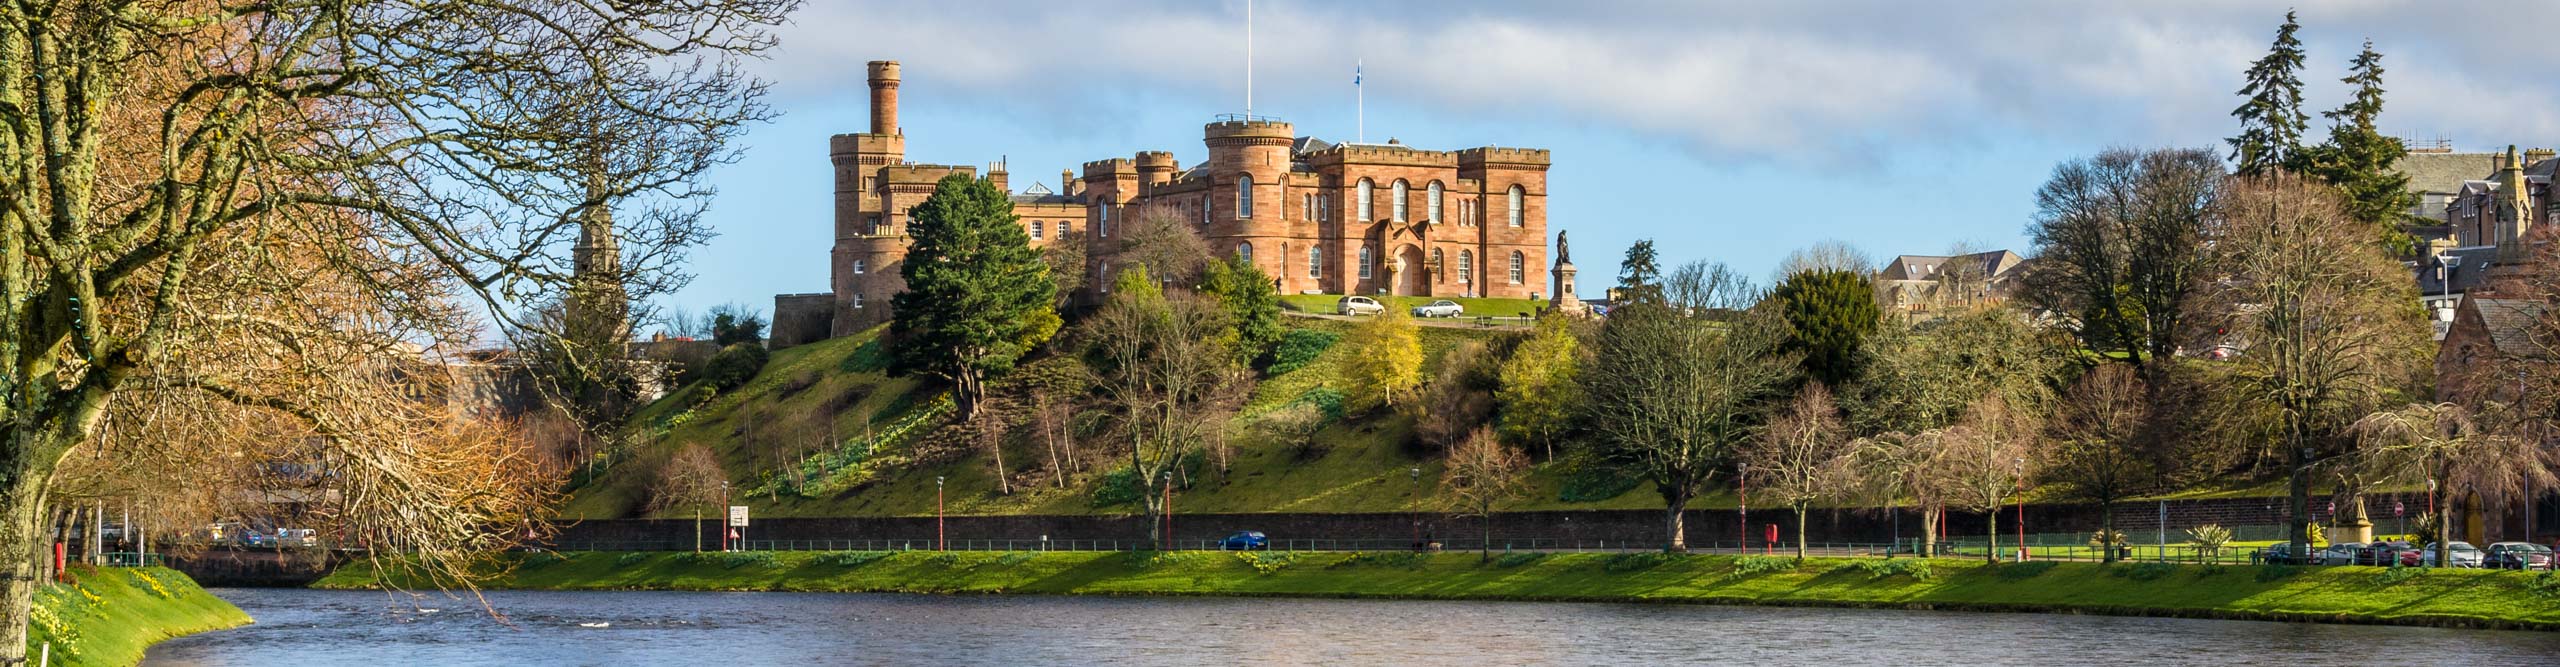 Inverness Castle and river at sunset, Scotland, 